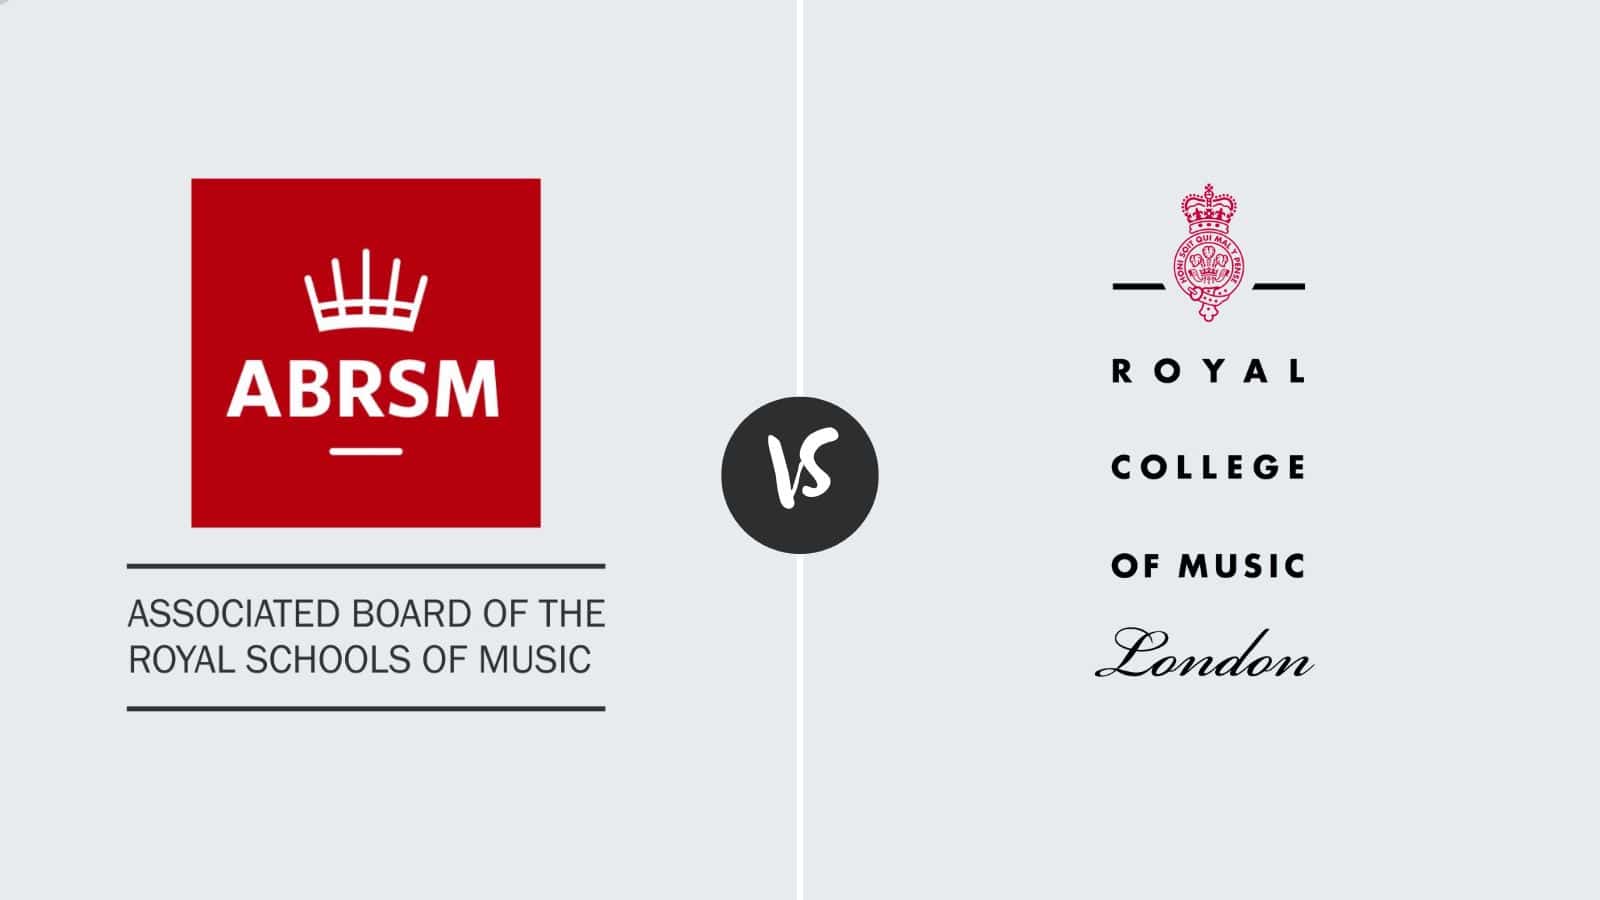 Associated Board of the Royal College of Music vs The Royal College of Music